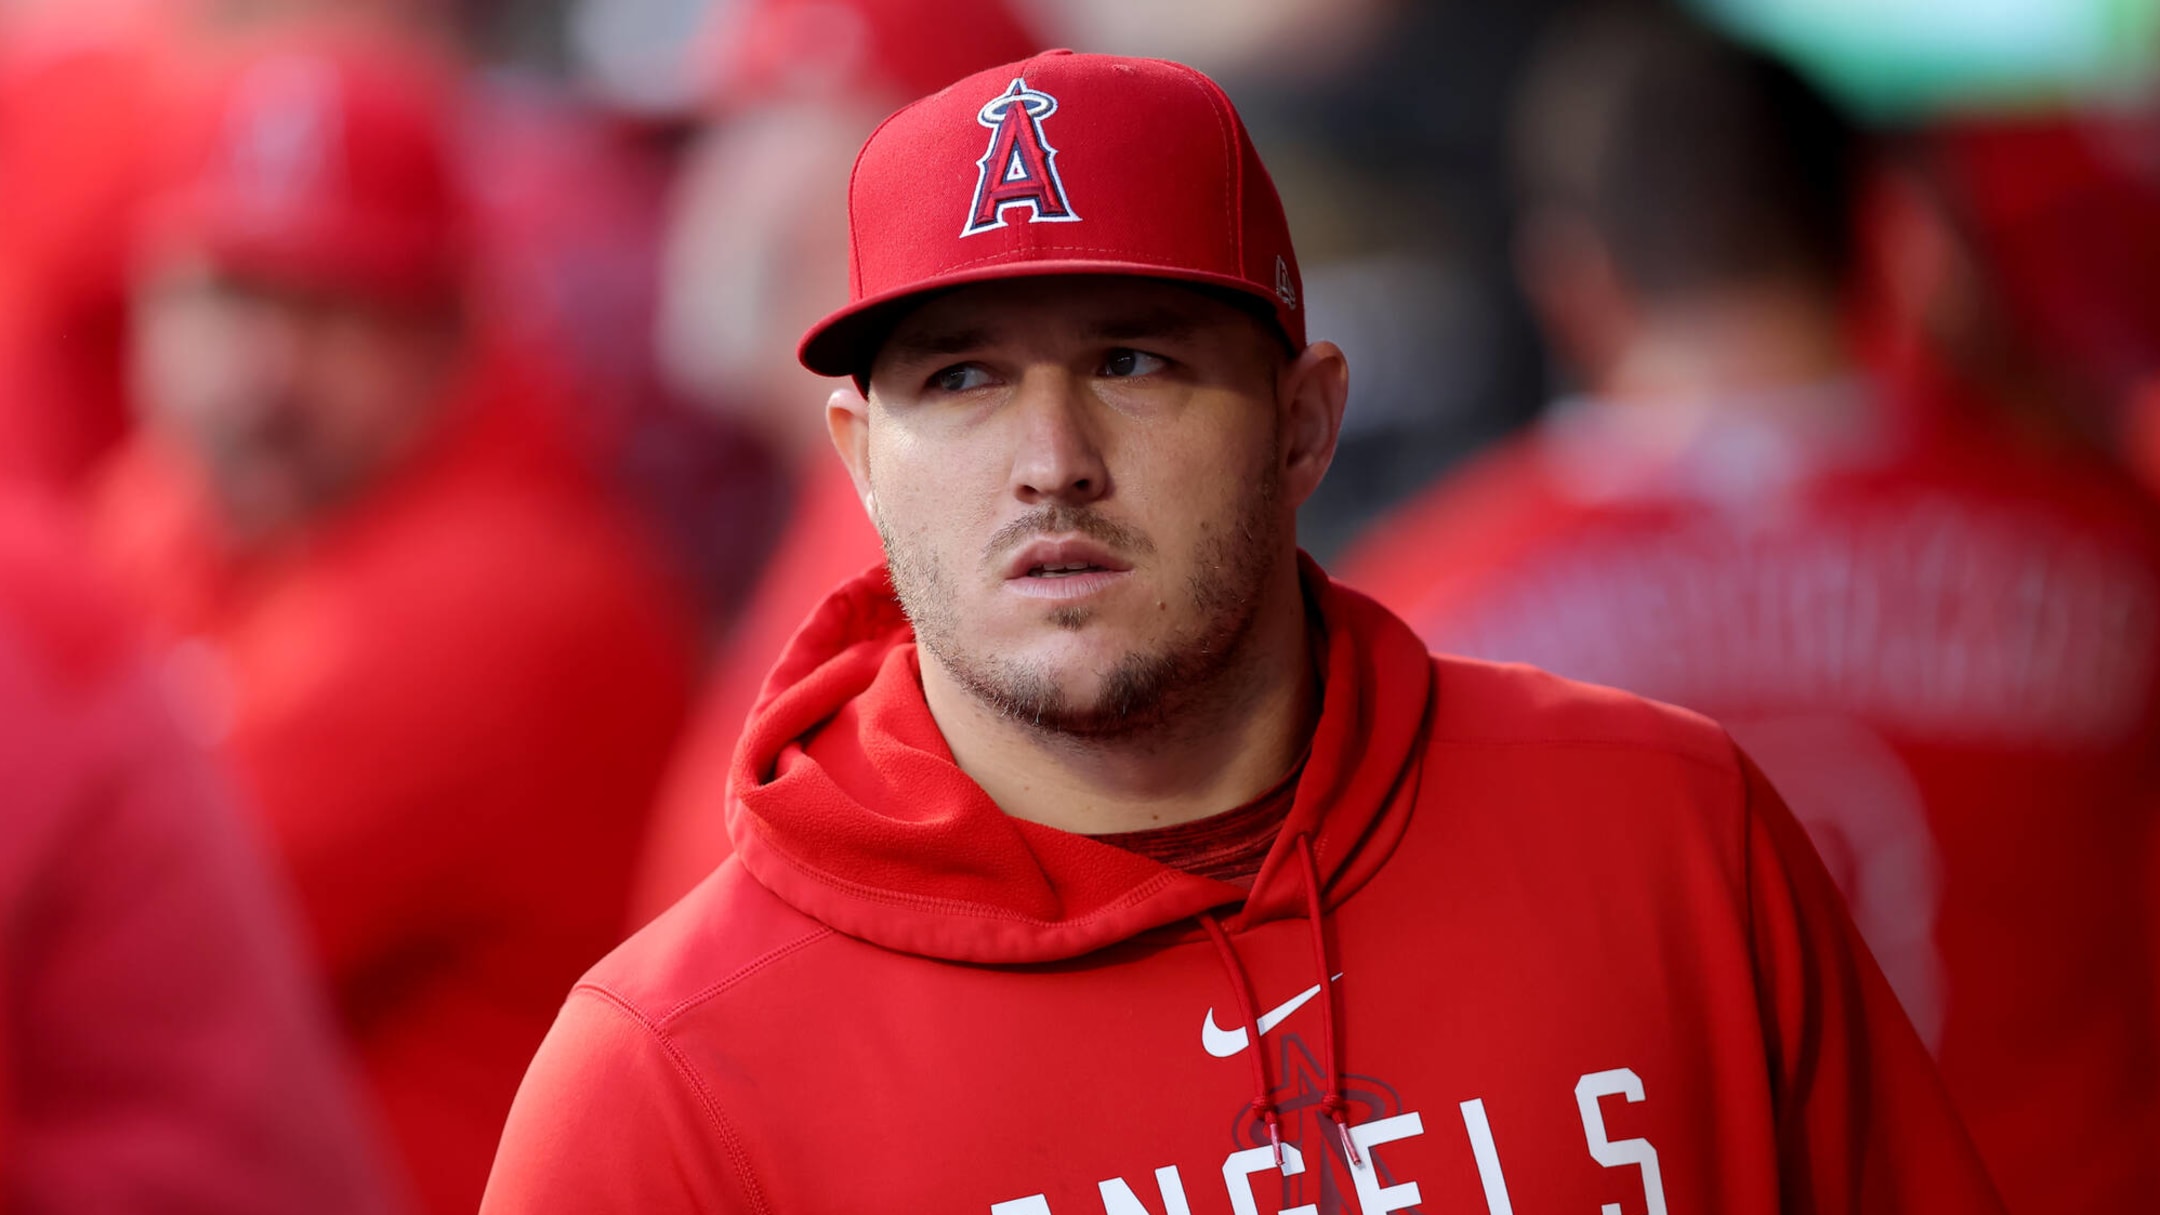 Angels News: Mike Trout 'Extremely Excited' To Play With Team USA